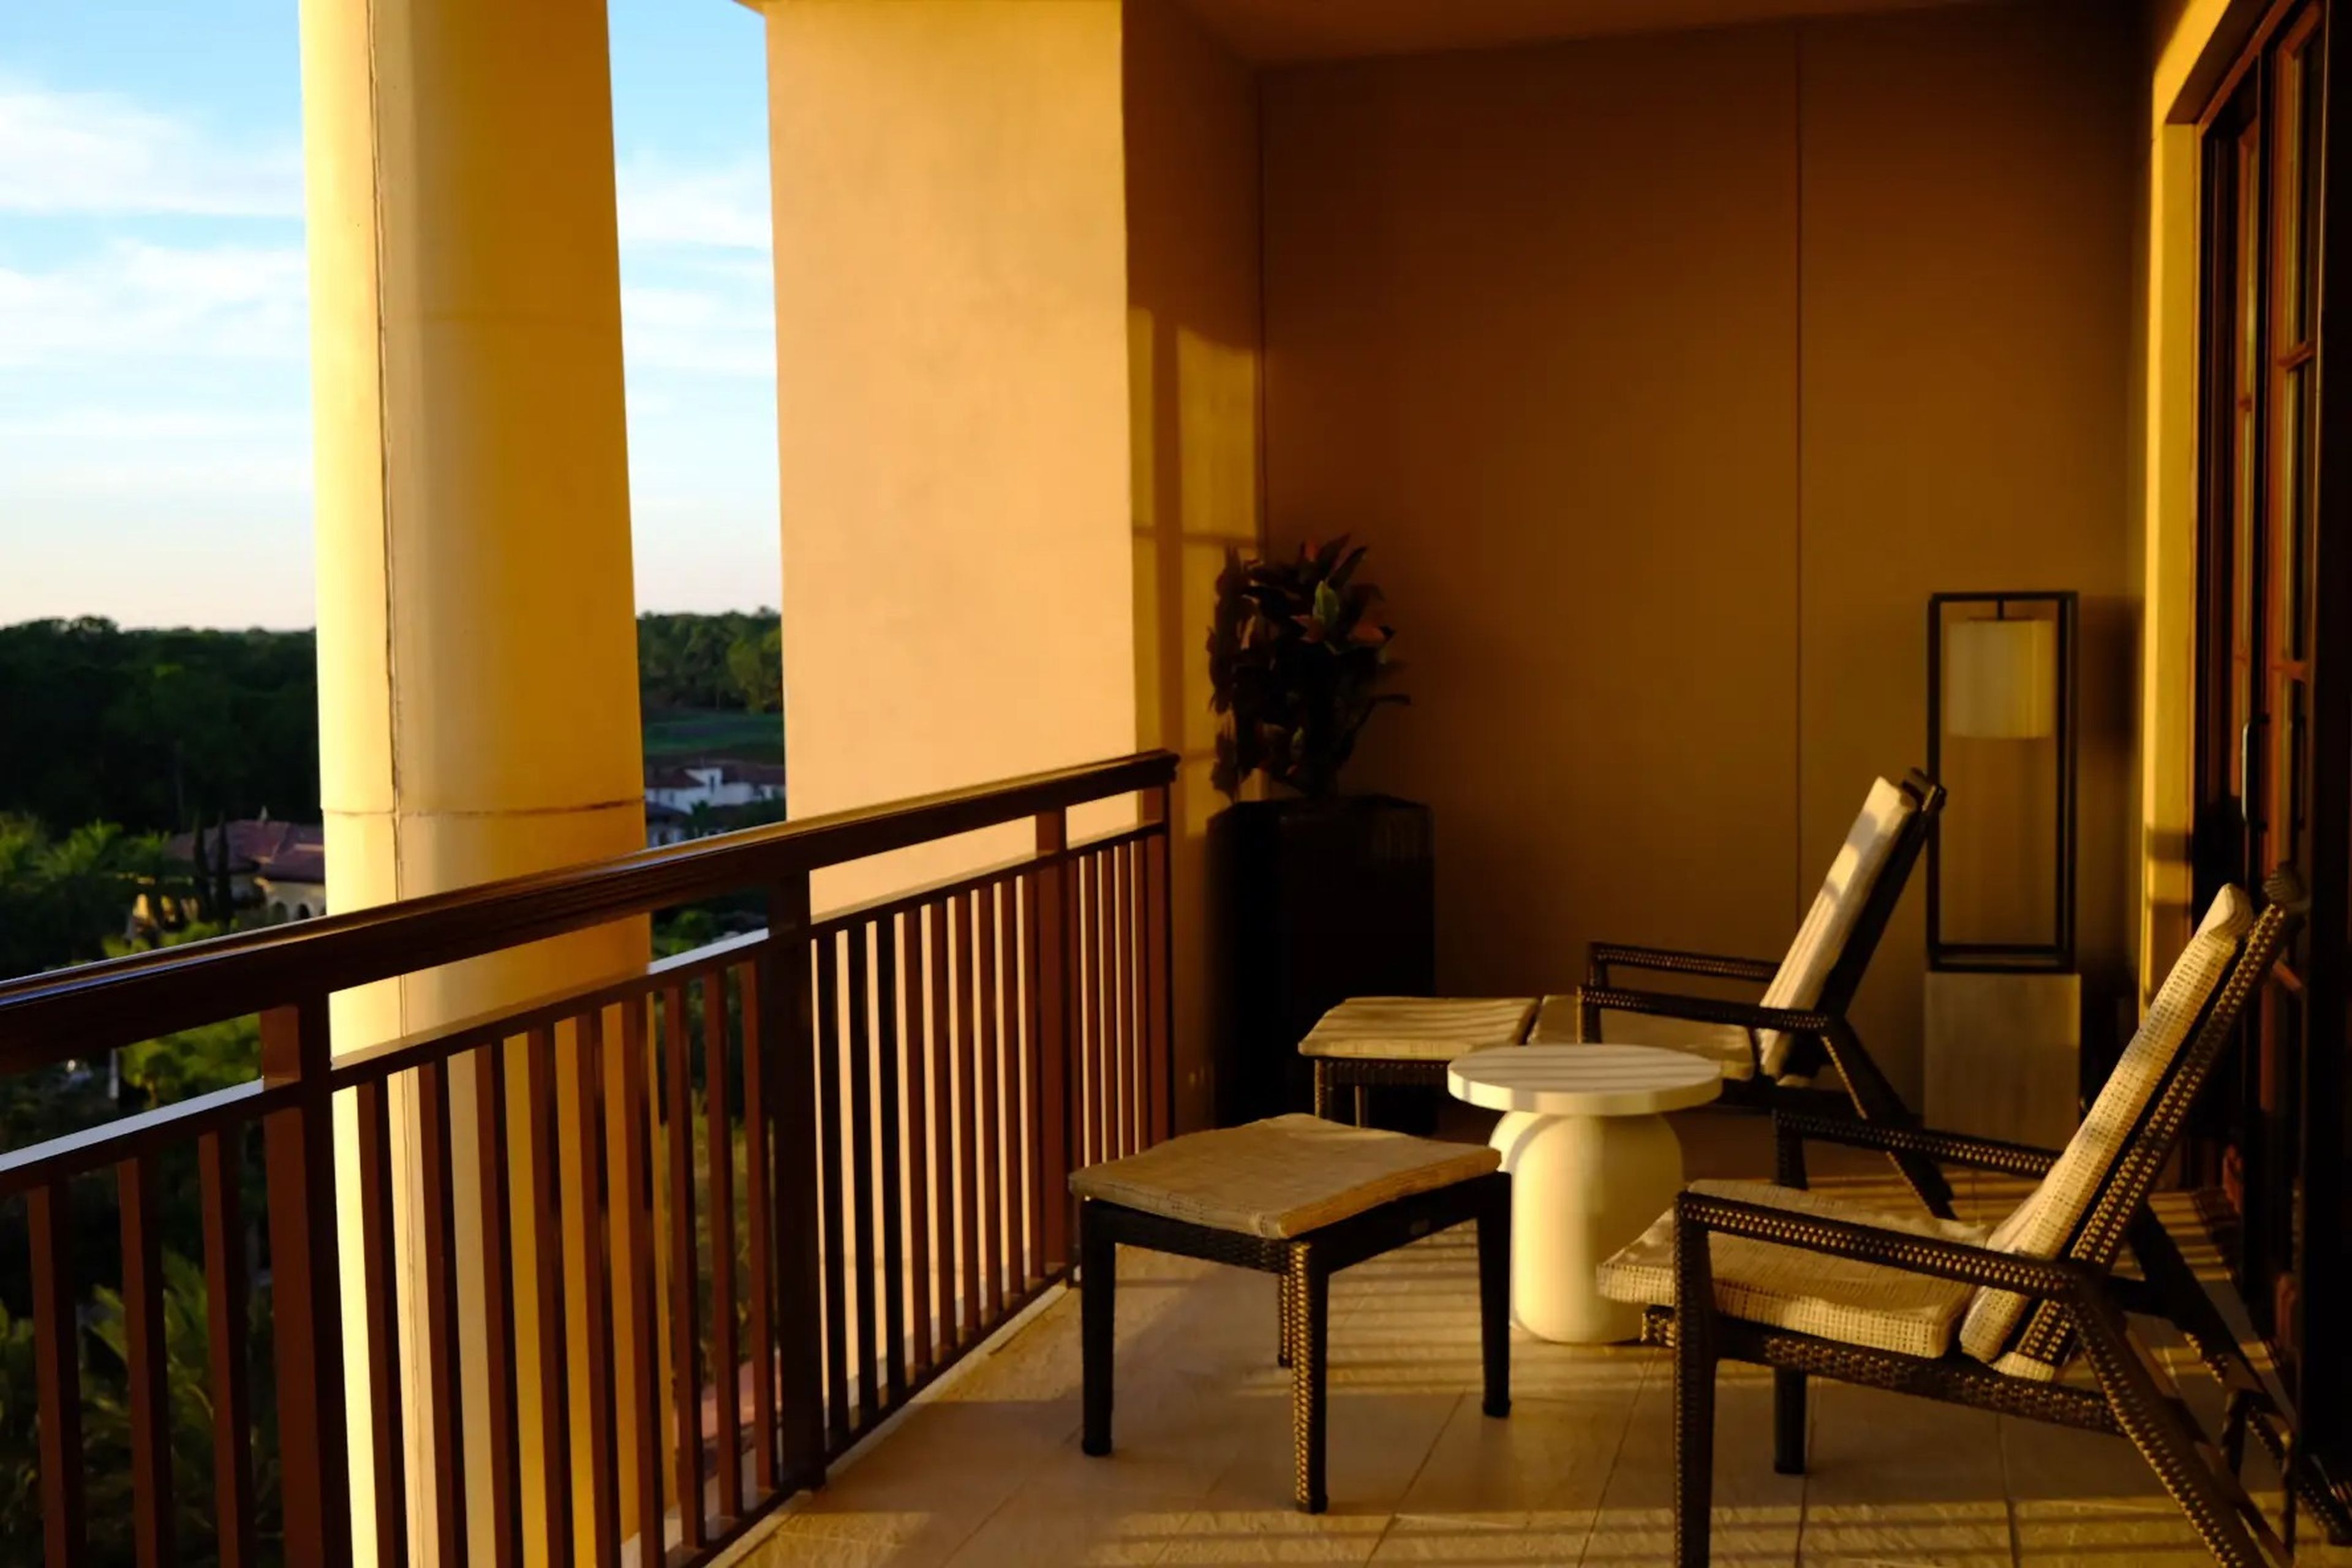 Chairs and balcony in Disney World Four Seasons room